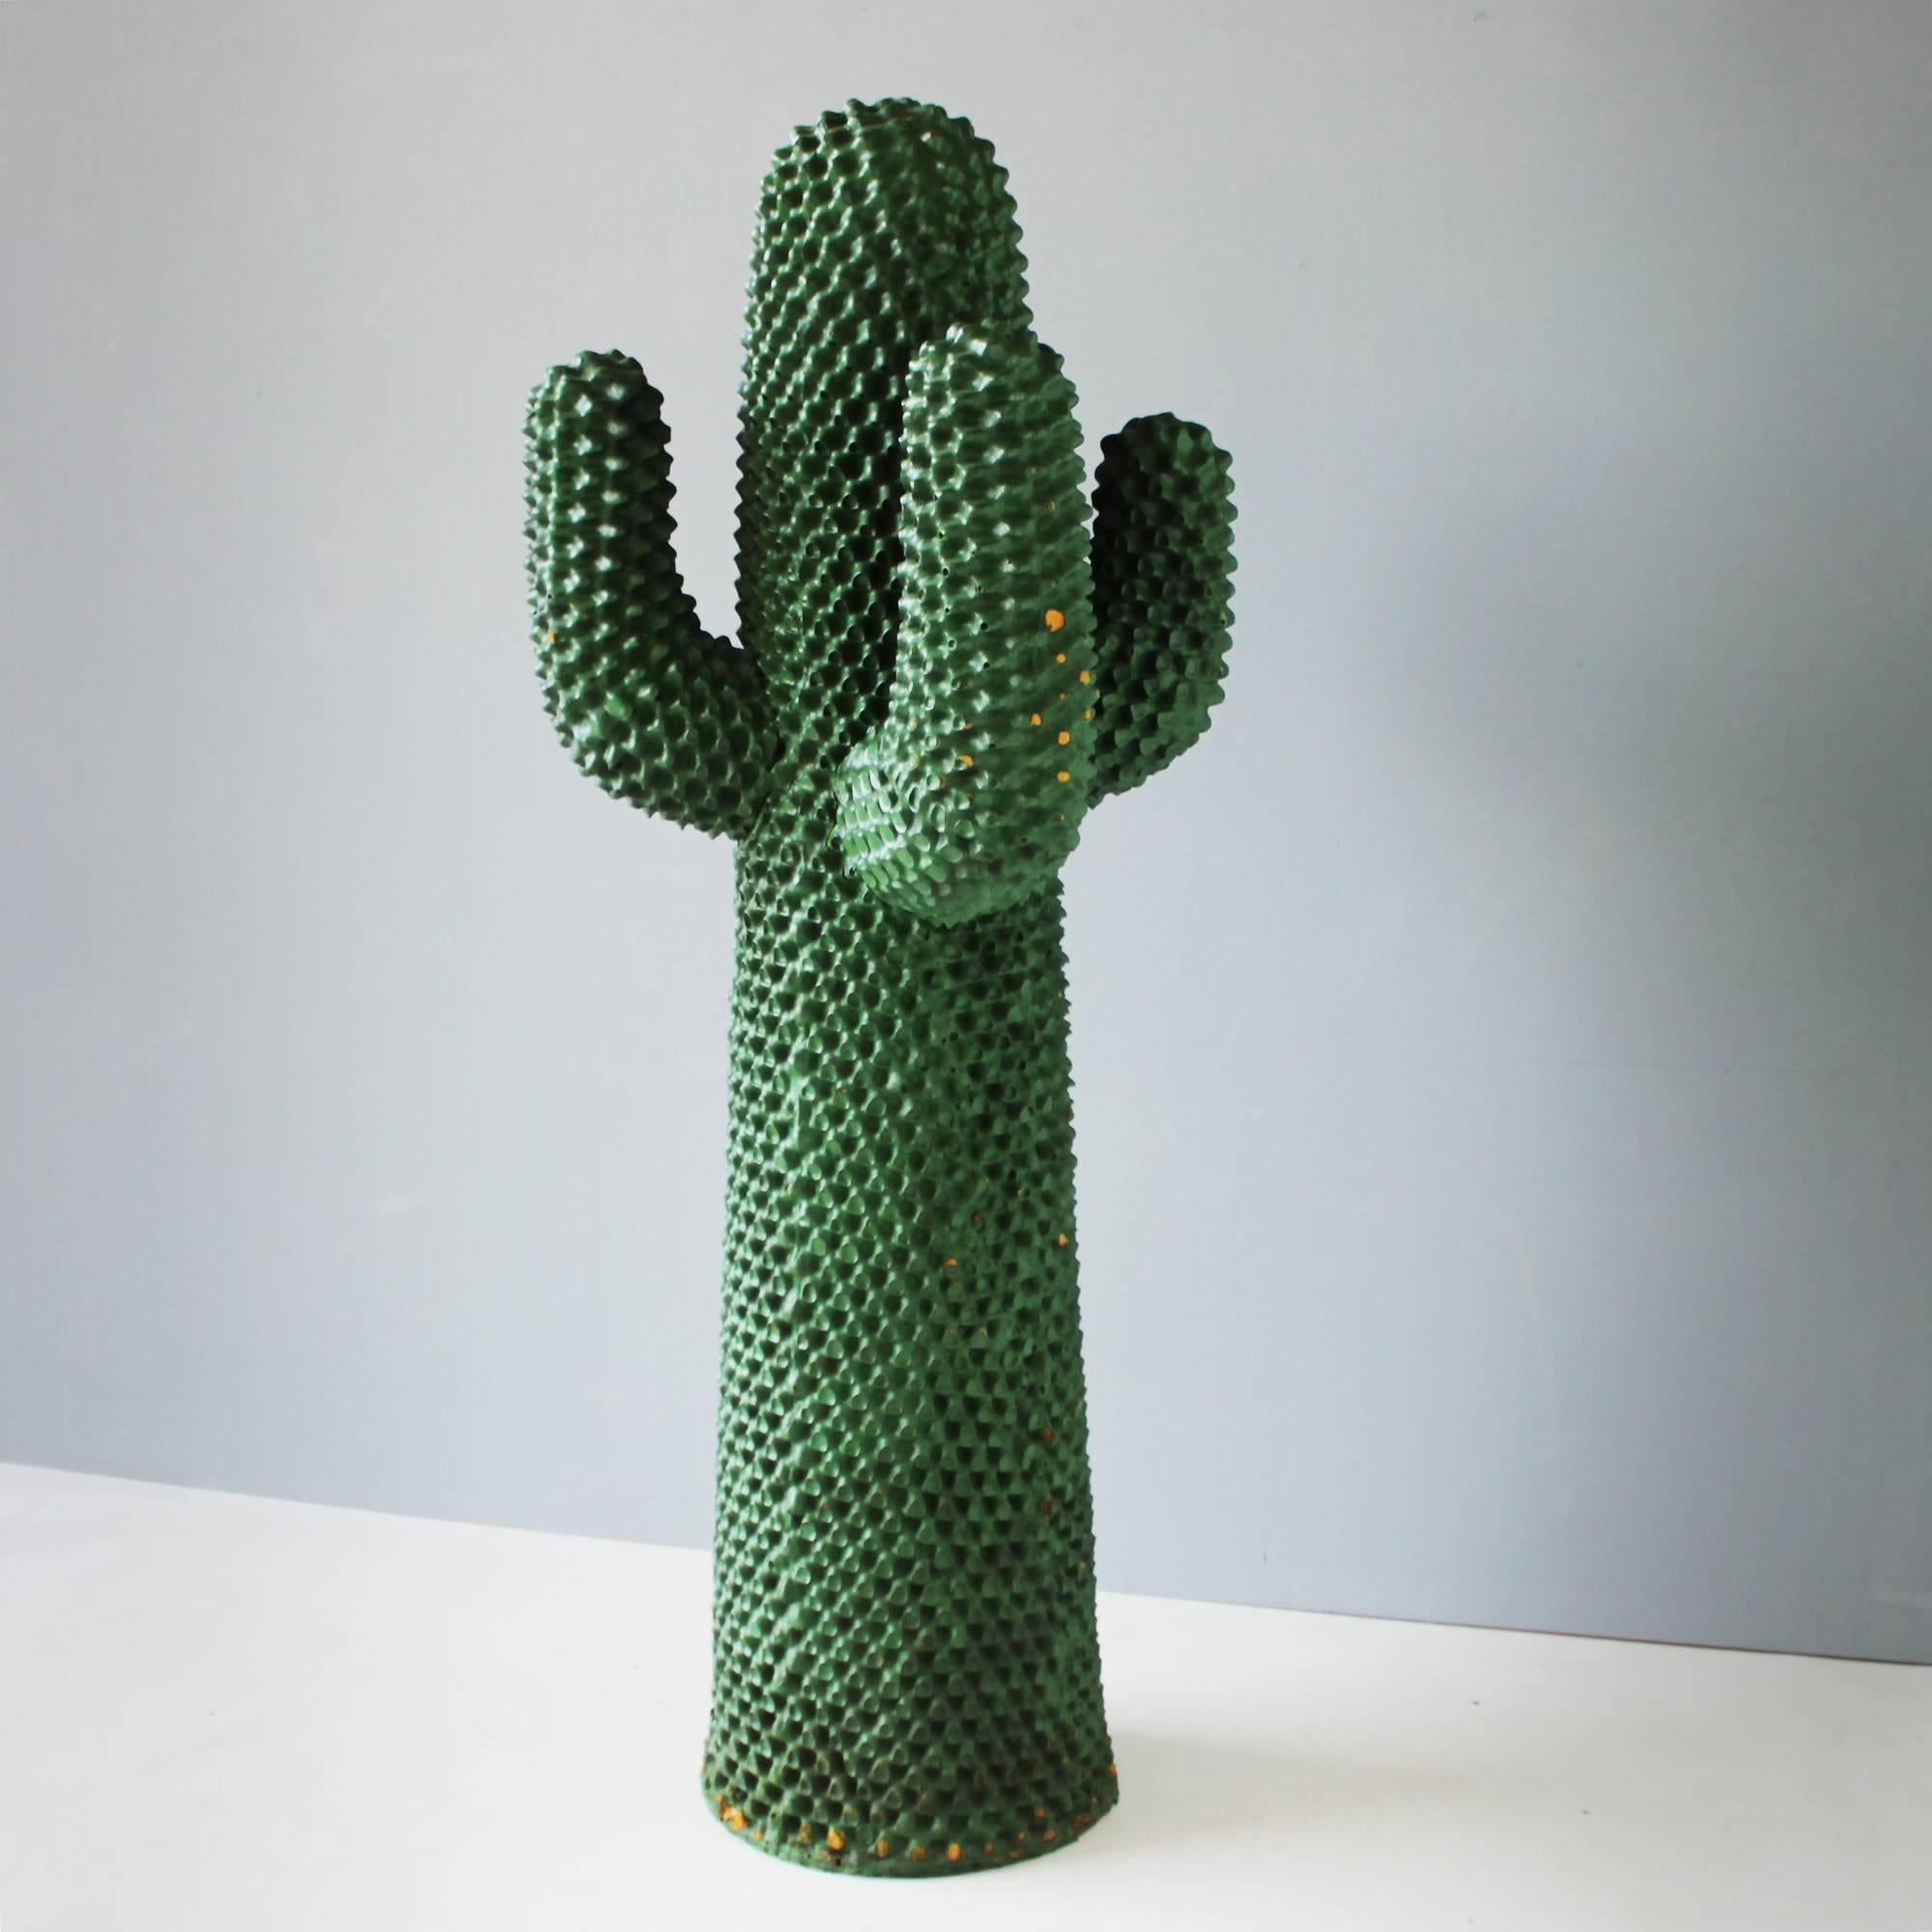 This is the original vintage coat hanger cactus, designed by Guido Drocco and Franco Mello for Gufram in 1968. Some wear and traces of ages, but in an overall good original condition with a beautiful patine.
The Gufram Cactus is included in several